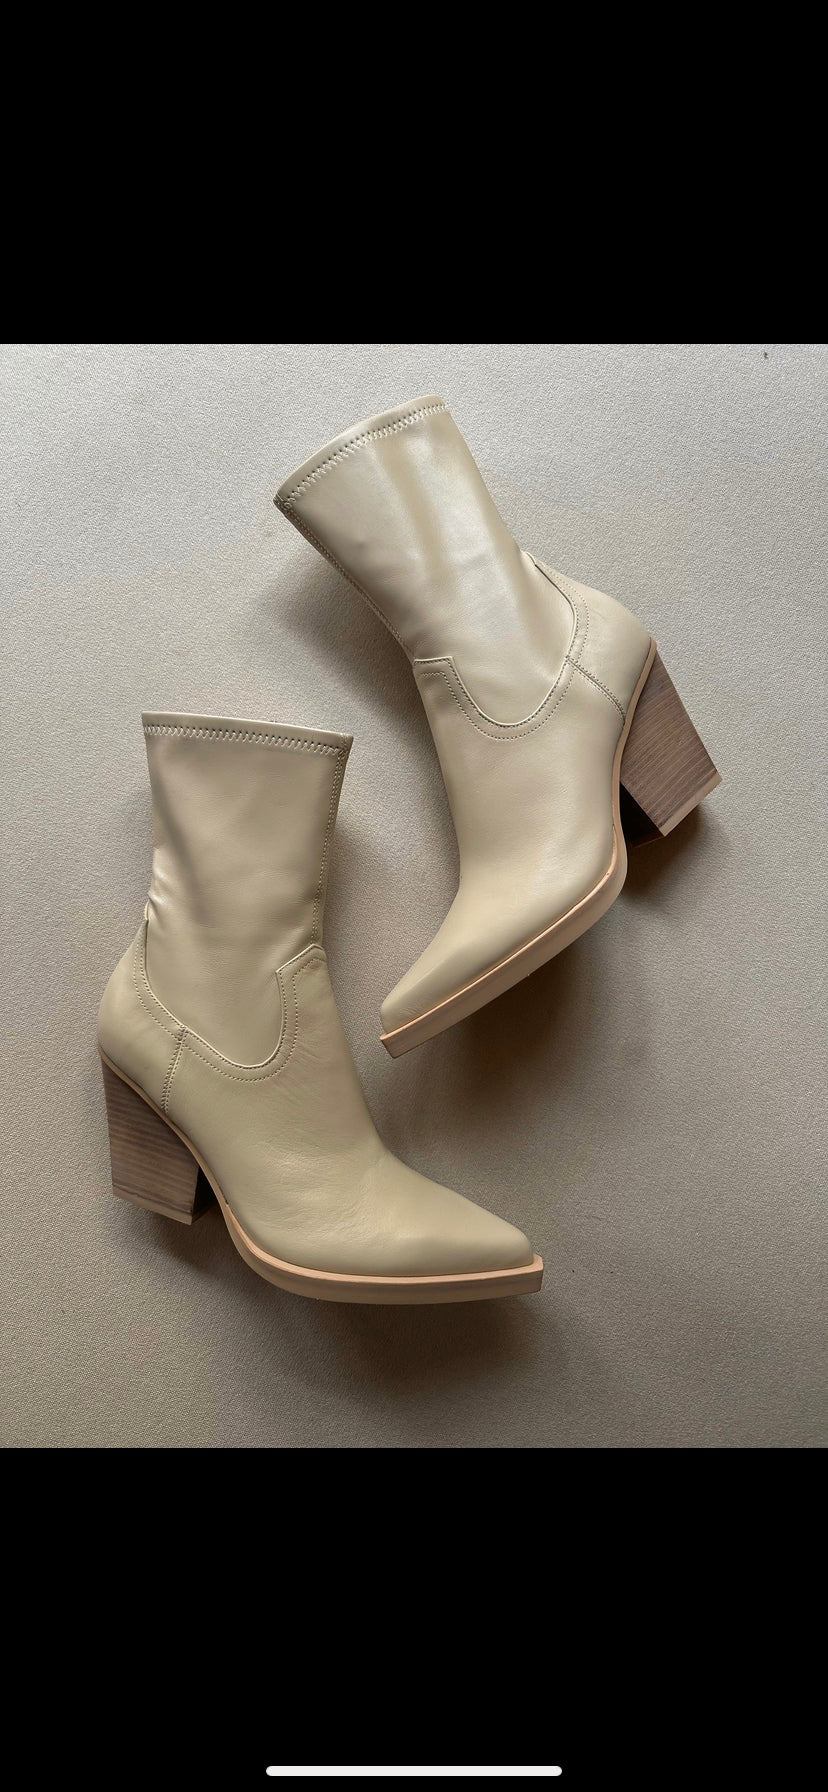 Boyd Boots by Dolce Vita - FINAL SALE